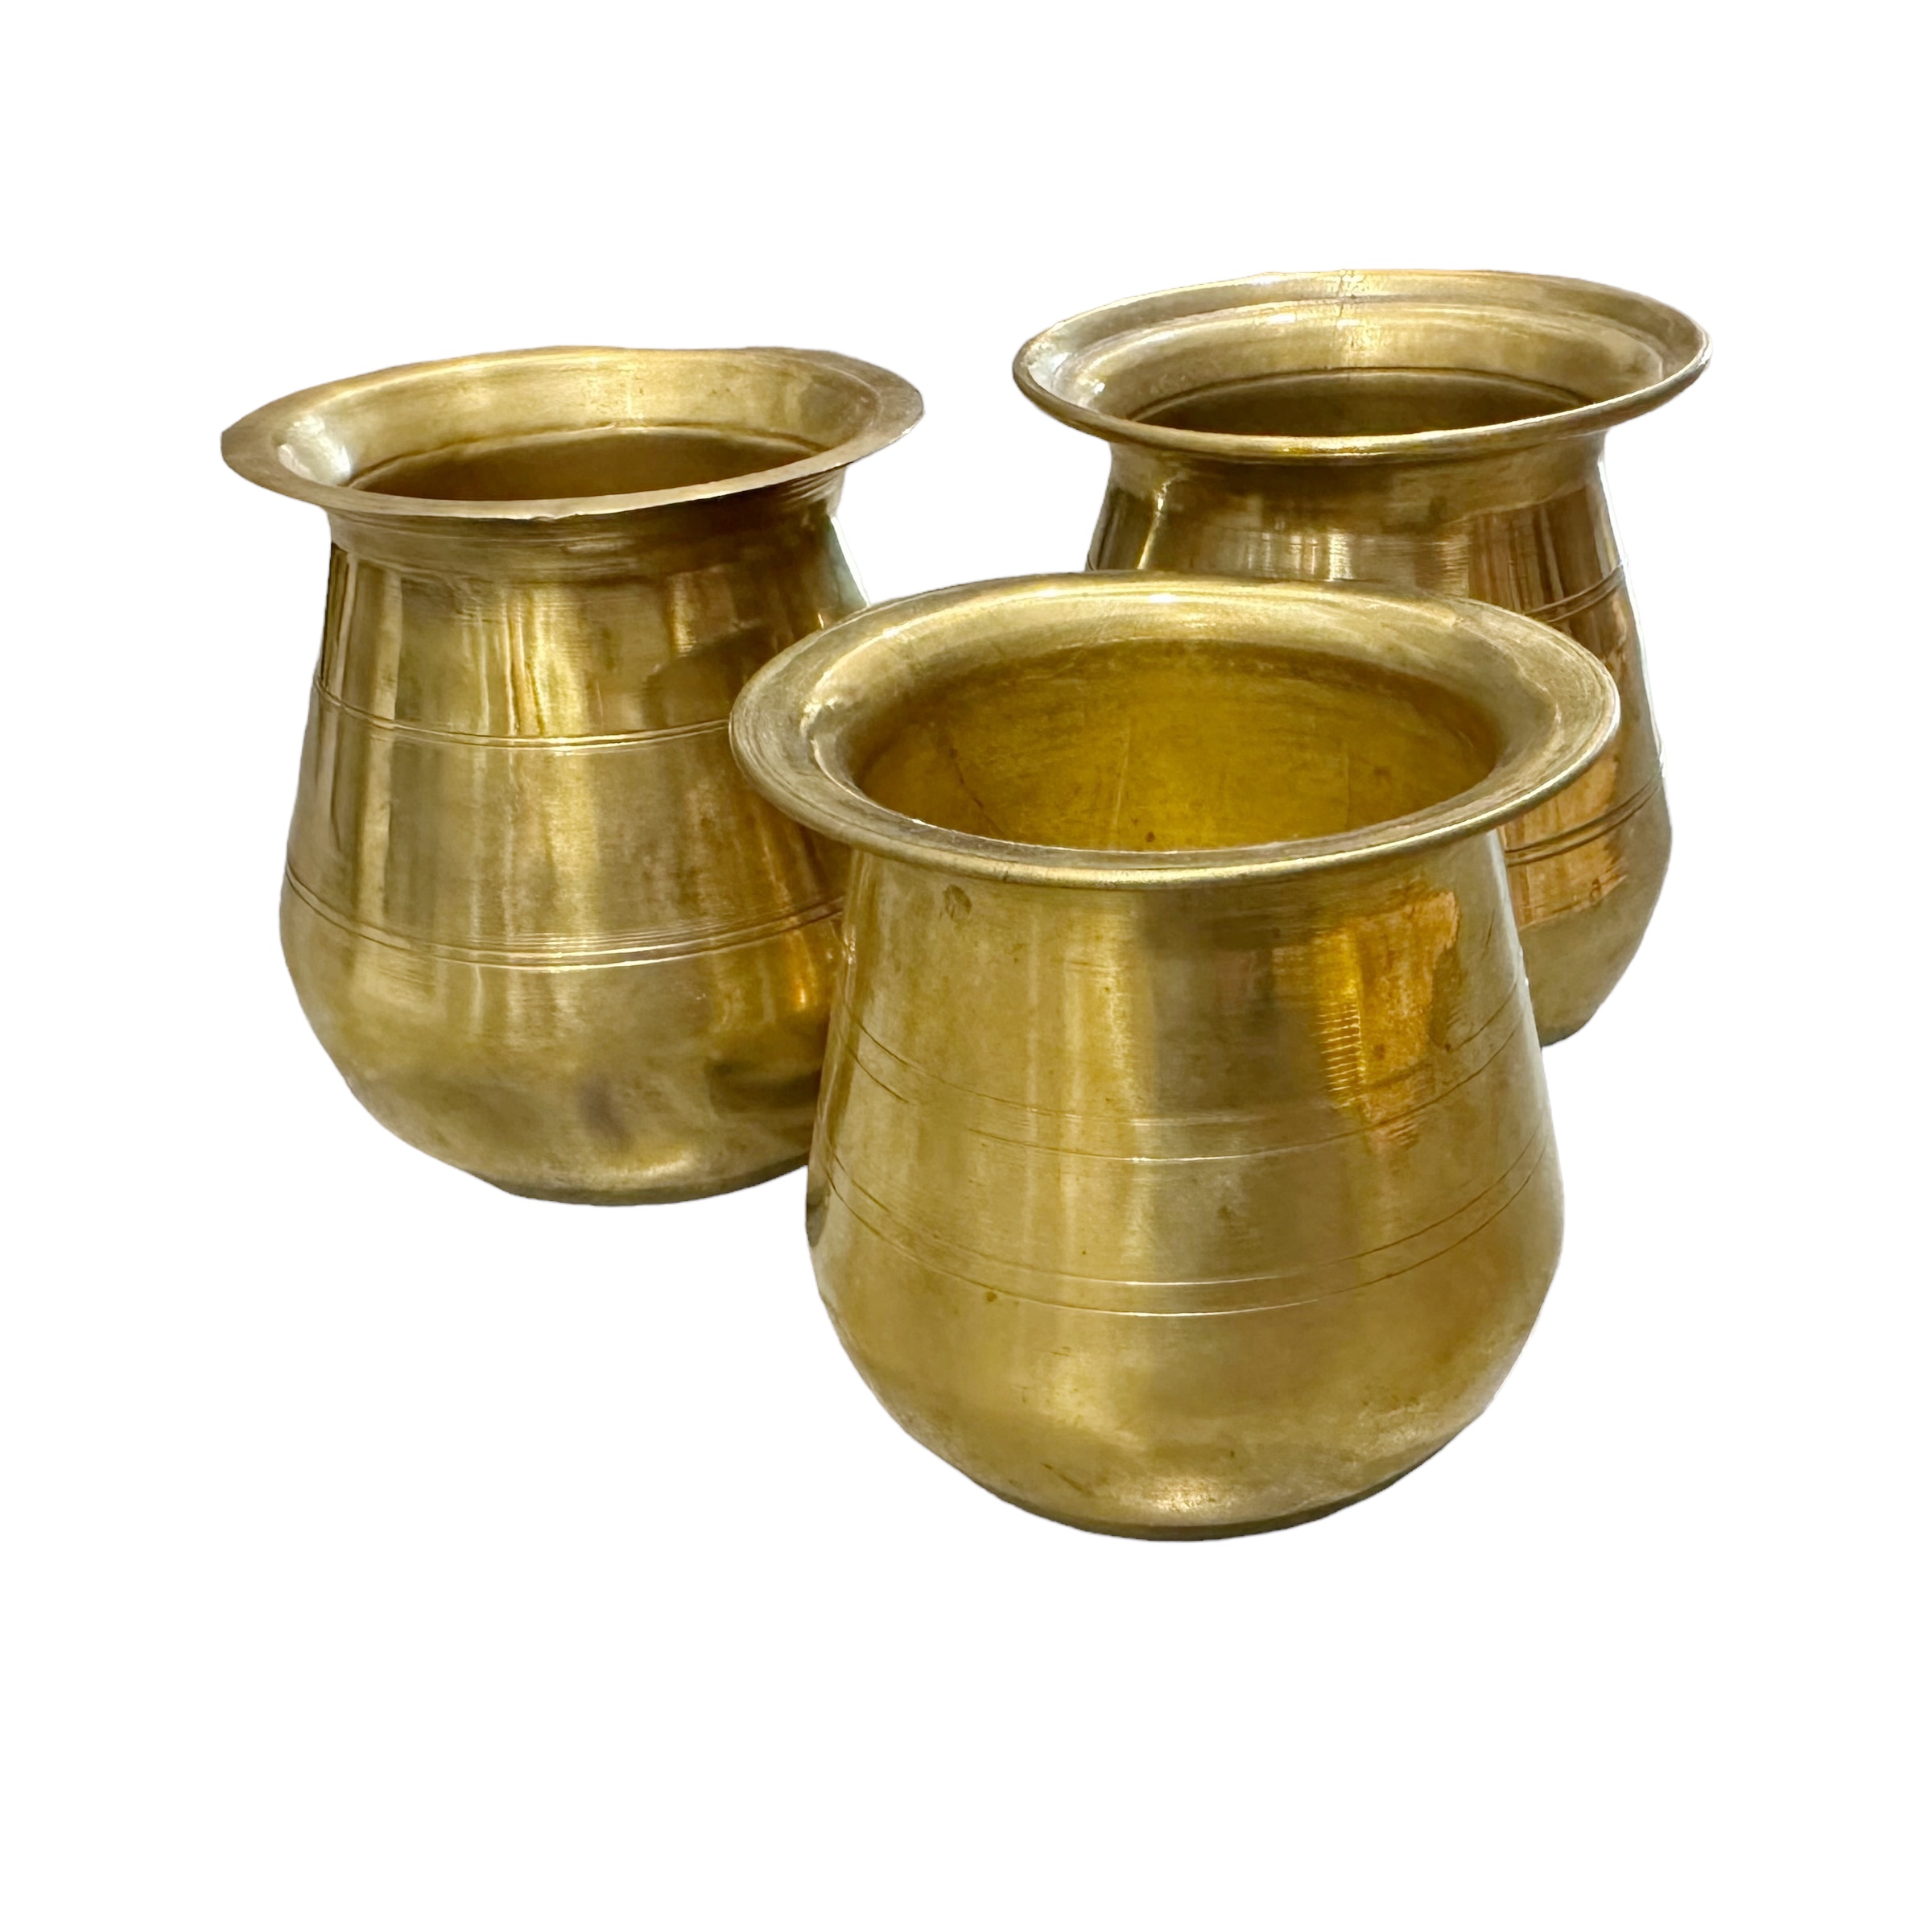 BRASS Little CUP From INDIA D10/2171 -  Canada